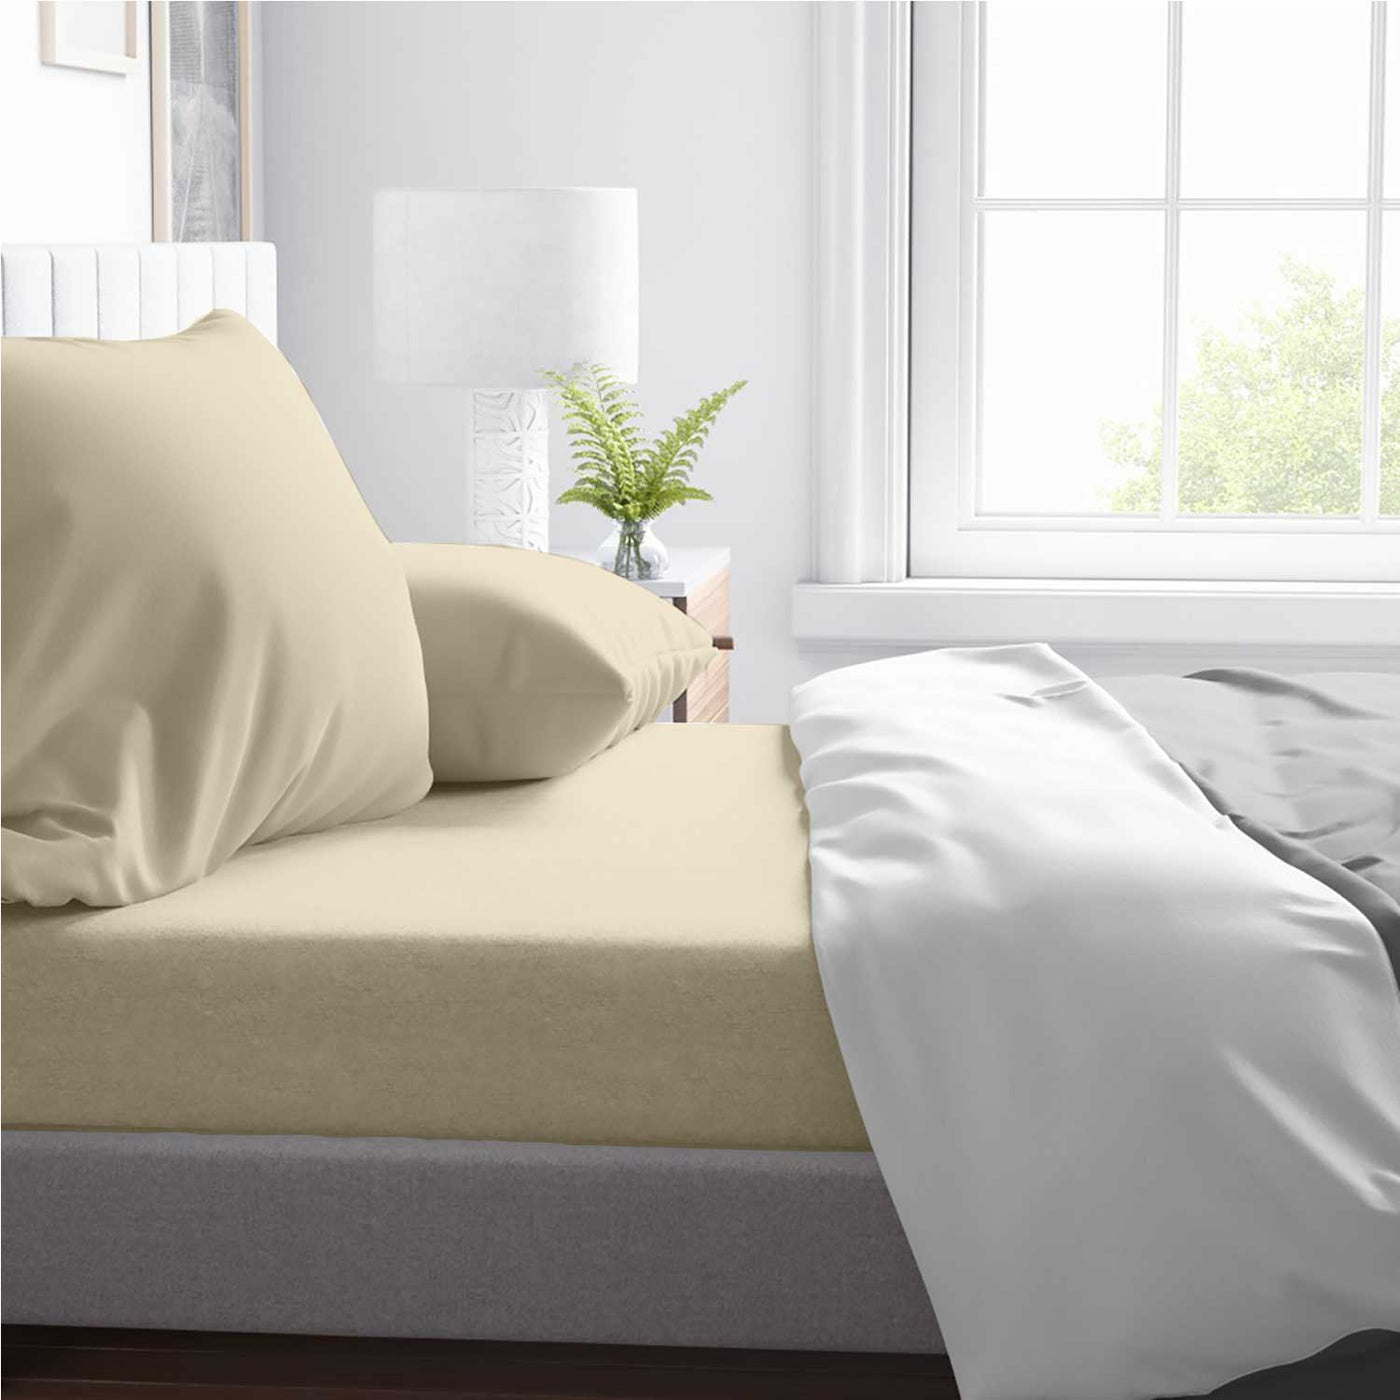 1 Piece Fitted Bed Sheet 100% Egyptian Cotton 600 Thread Count - Light Colors